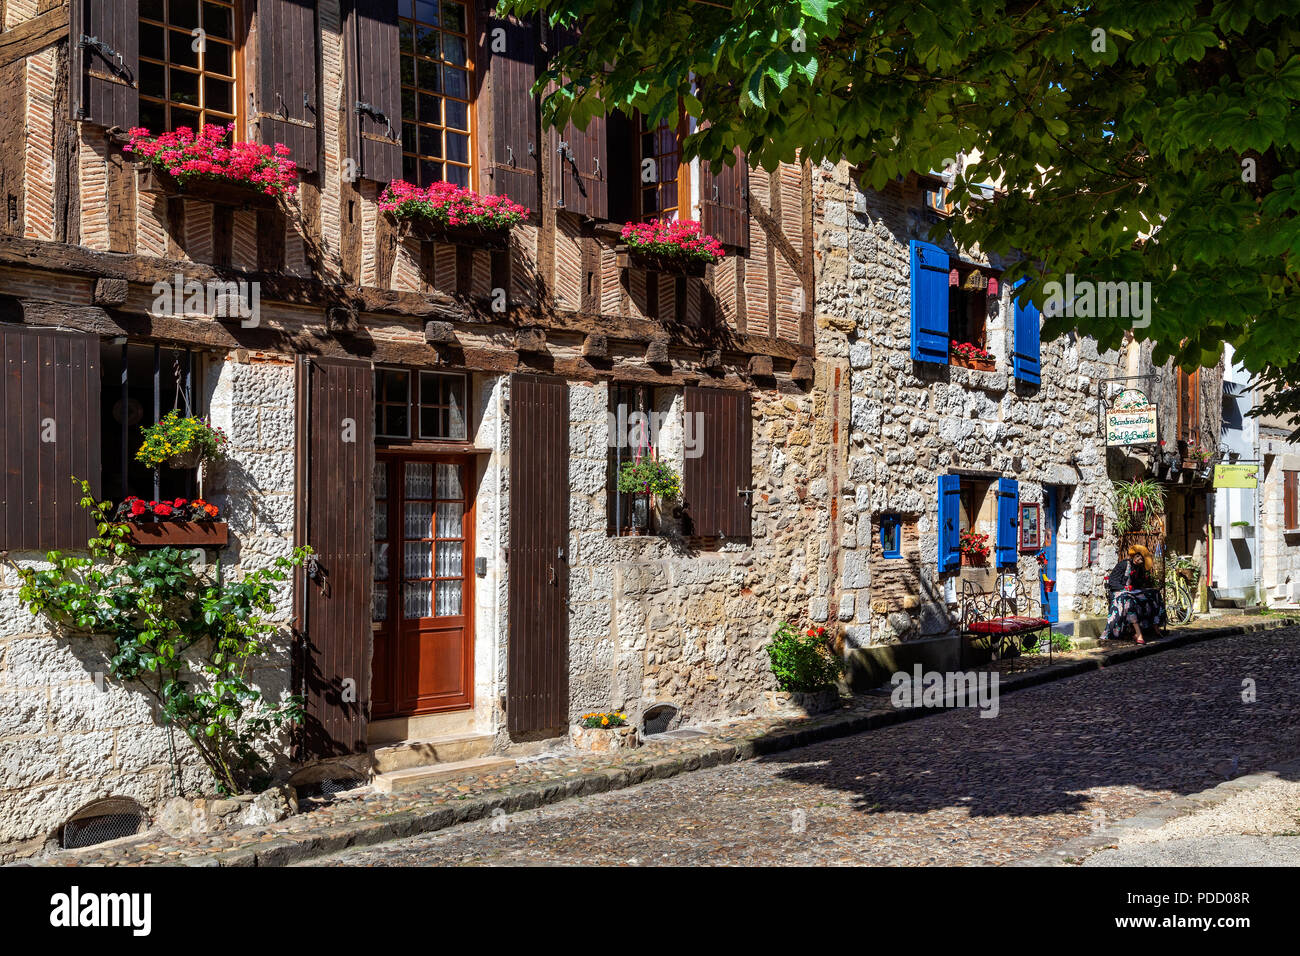 Picturesque old buildings in the town of Bergerac in the Dordogne department of the Nouvelle-Aquitaine in southwestern France. Stock Photo